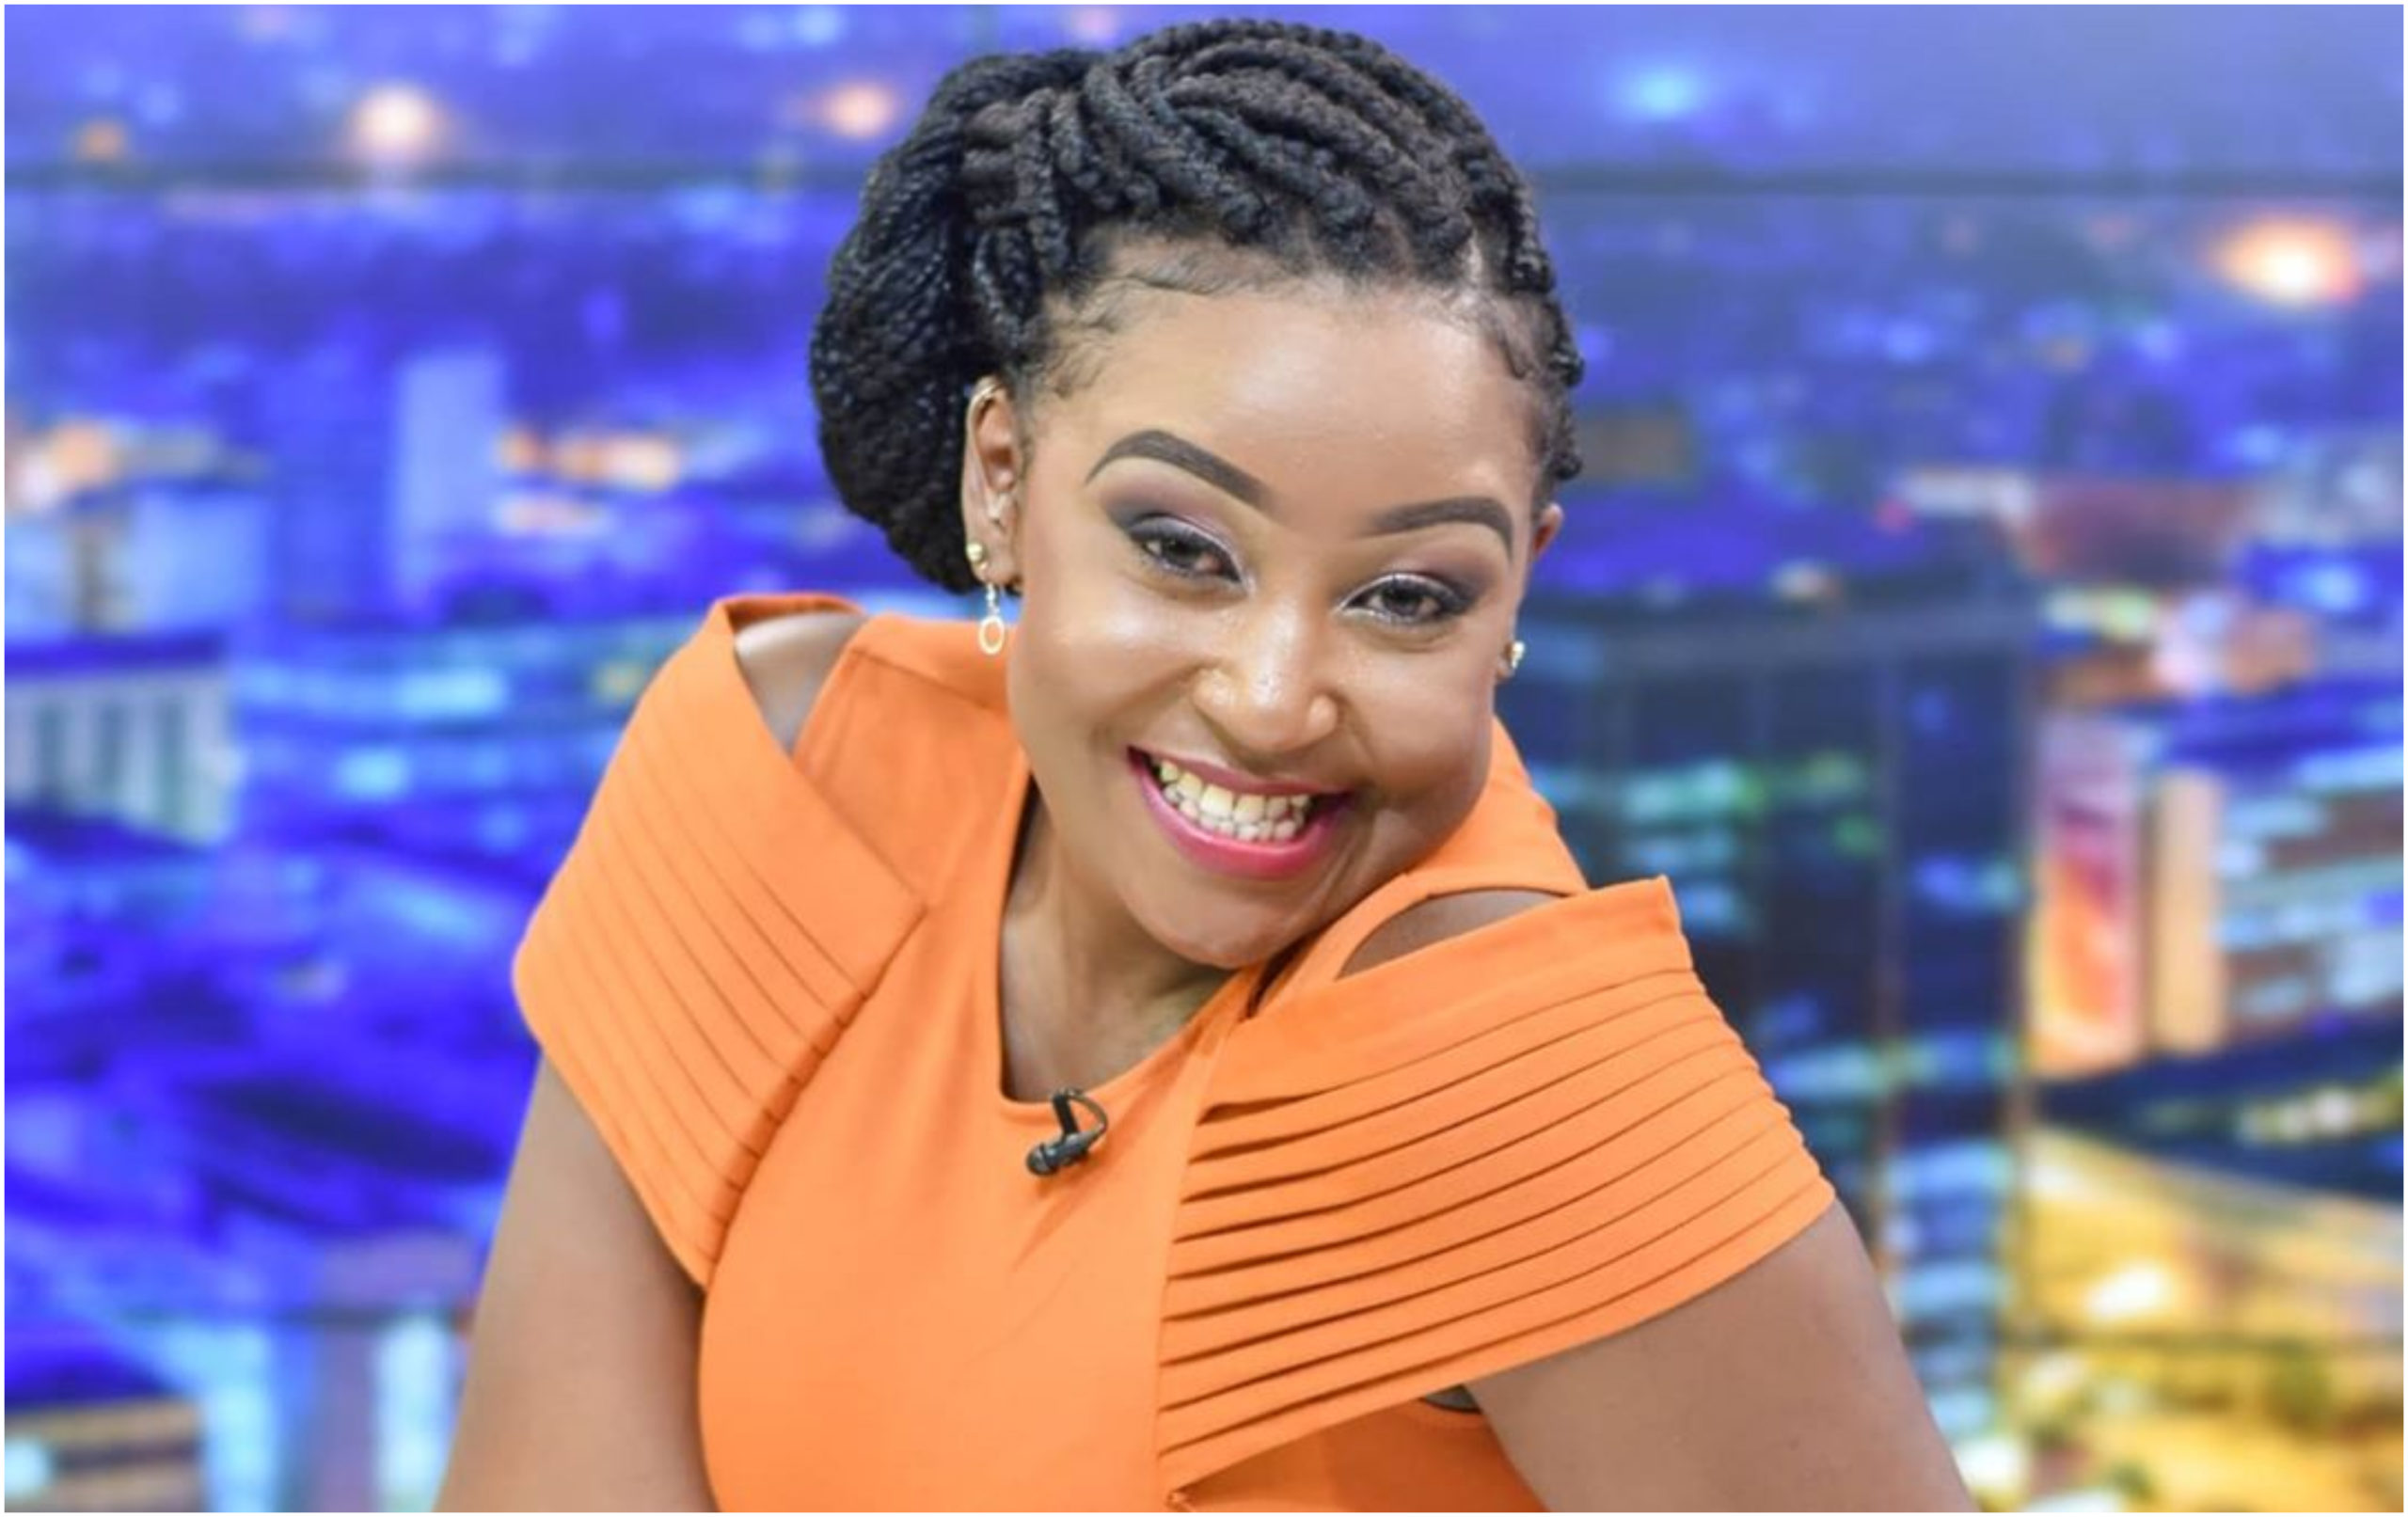 Betty Kyallo proudly shows off cellulite and stretch marks in video as she parades her curves in bikini